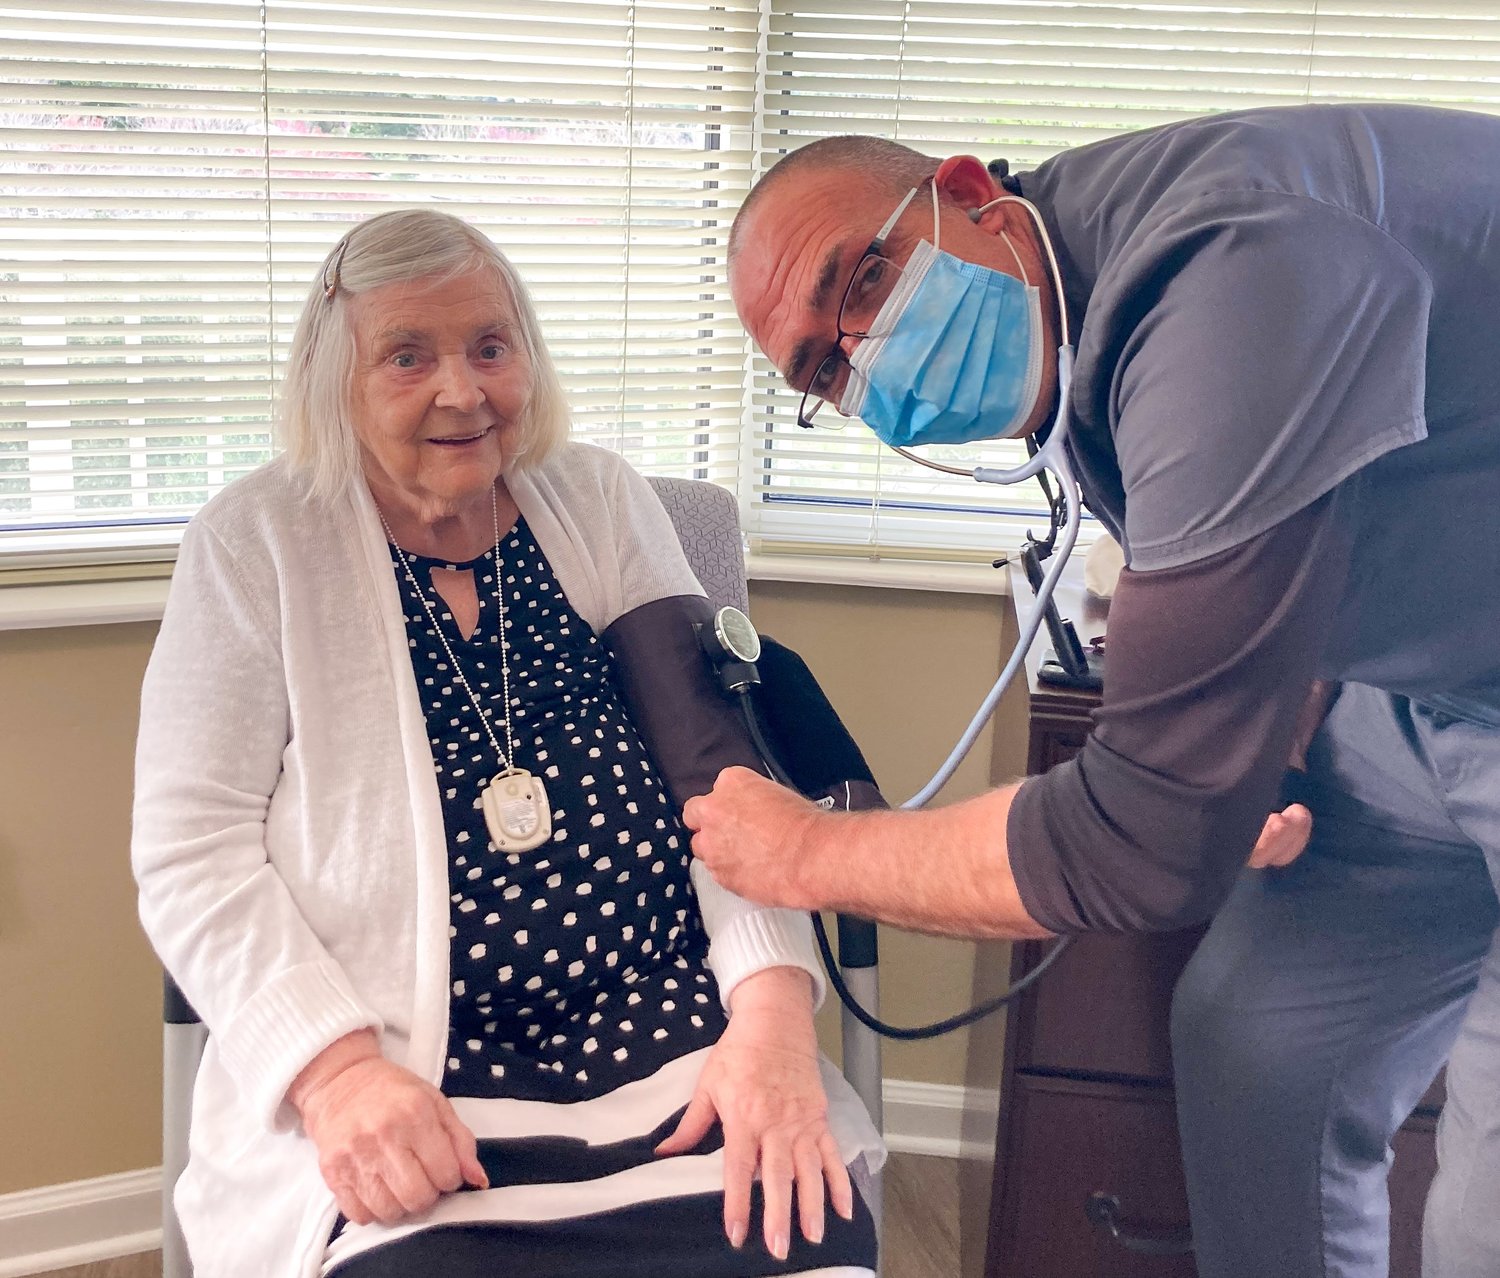 William Grieco, director of health and wellness at Cypress Village, is seen with a resident.